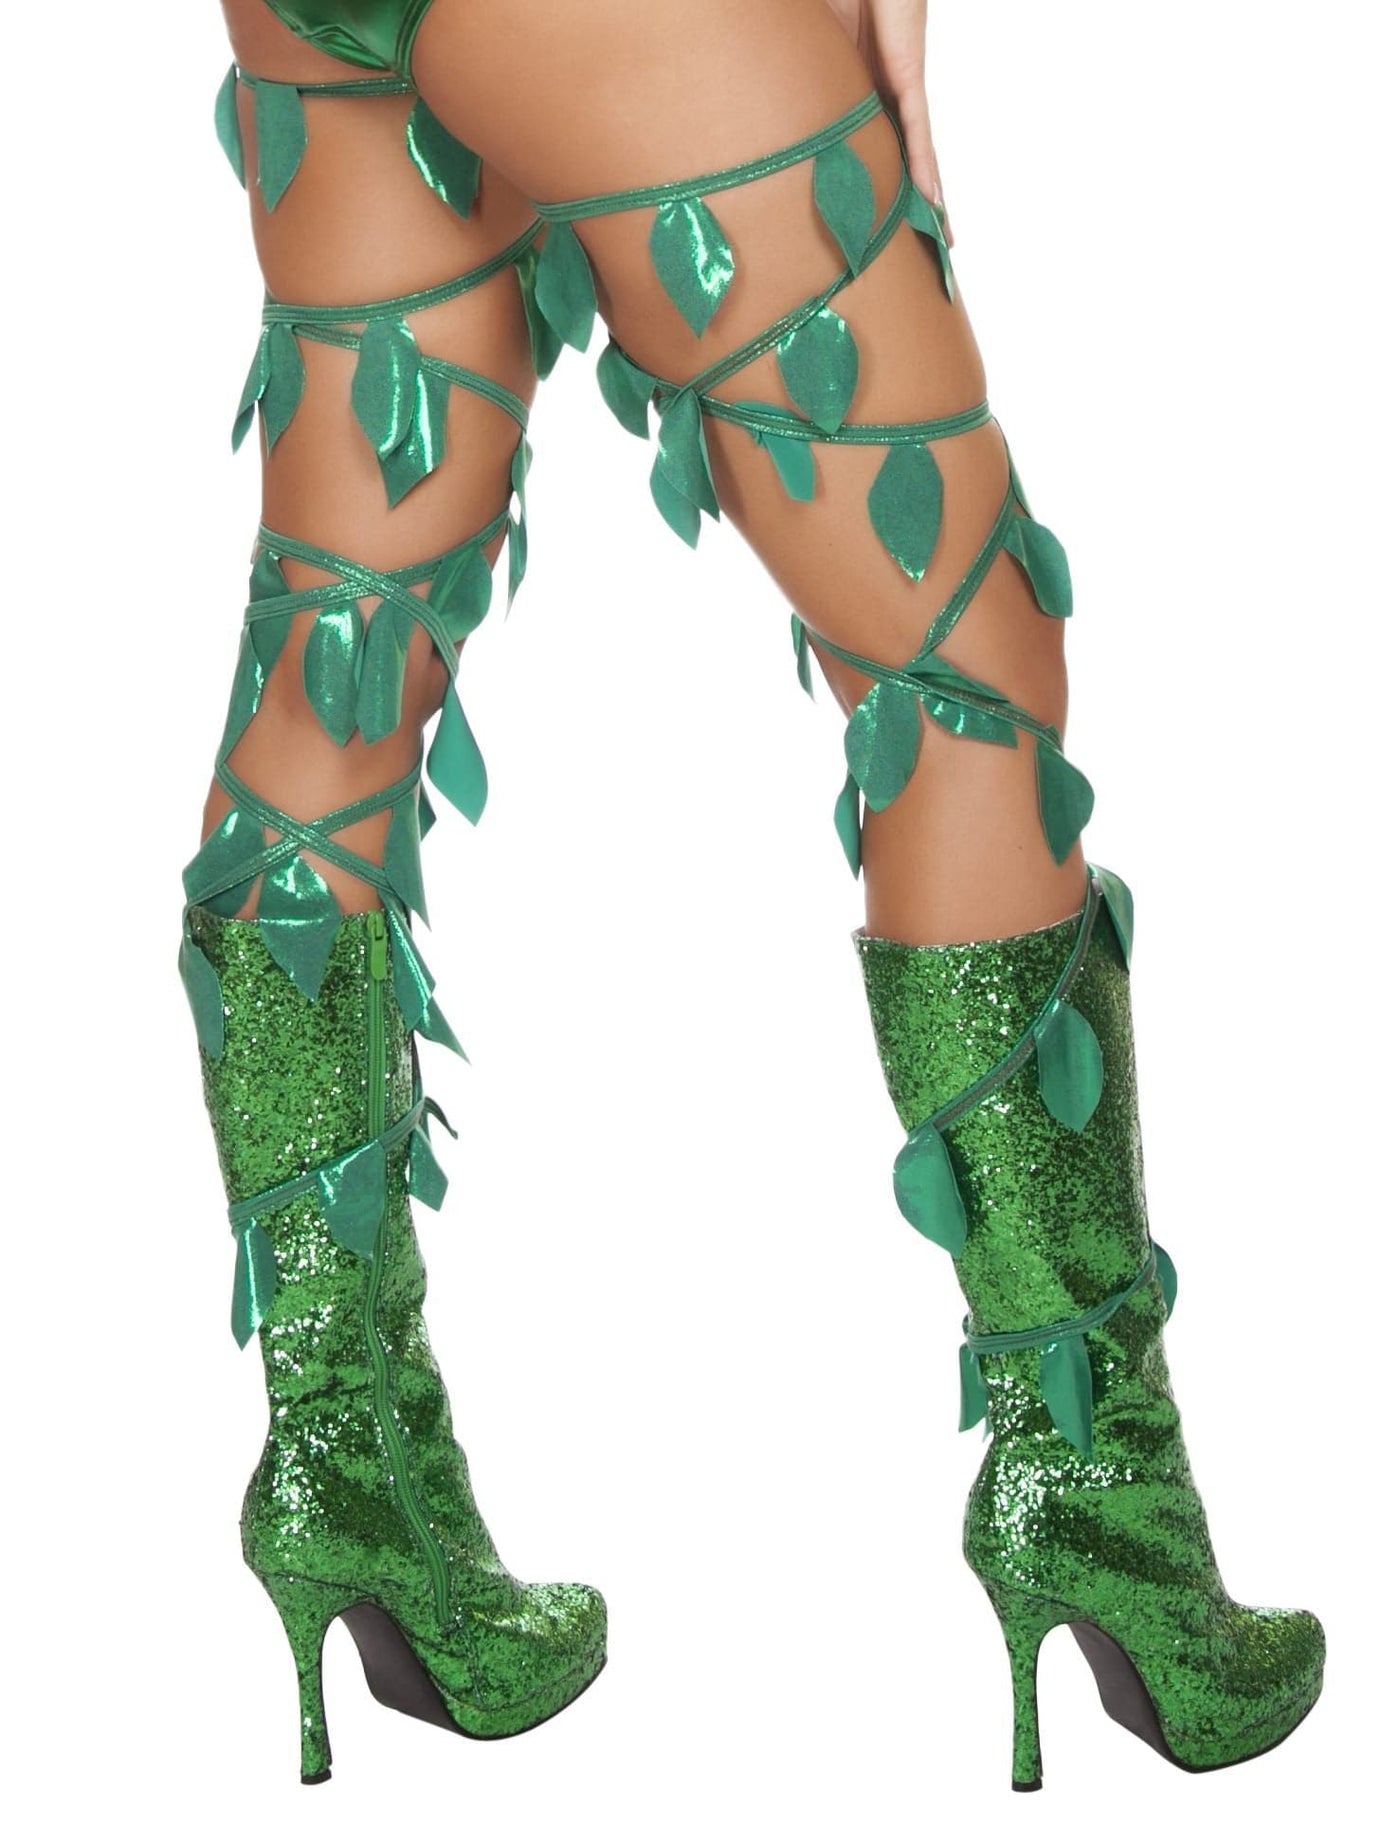 2pc. Poison Ivy Green Leaf Thigh Wraps Costume Accessories - For Love of Lingerie